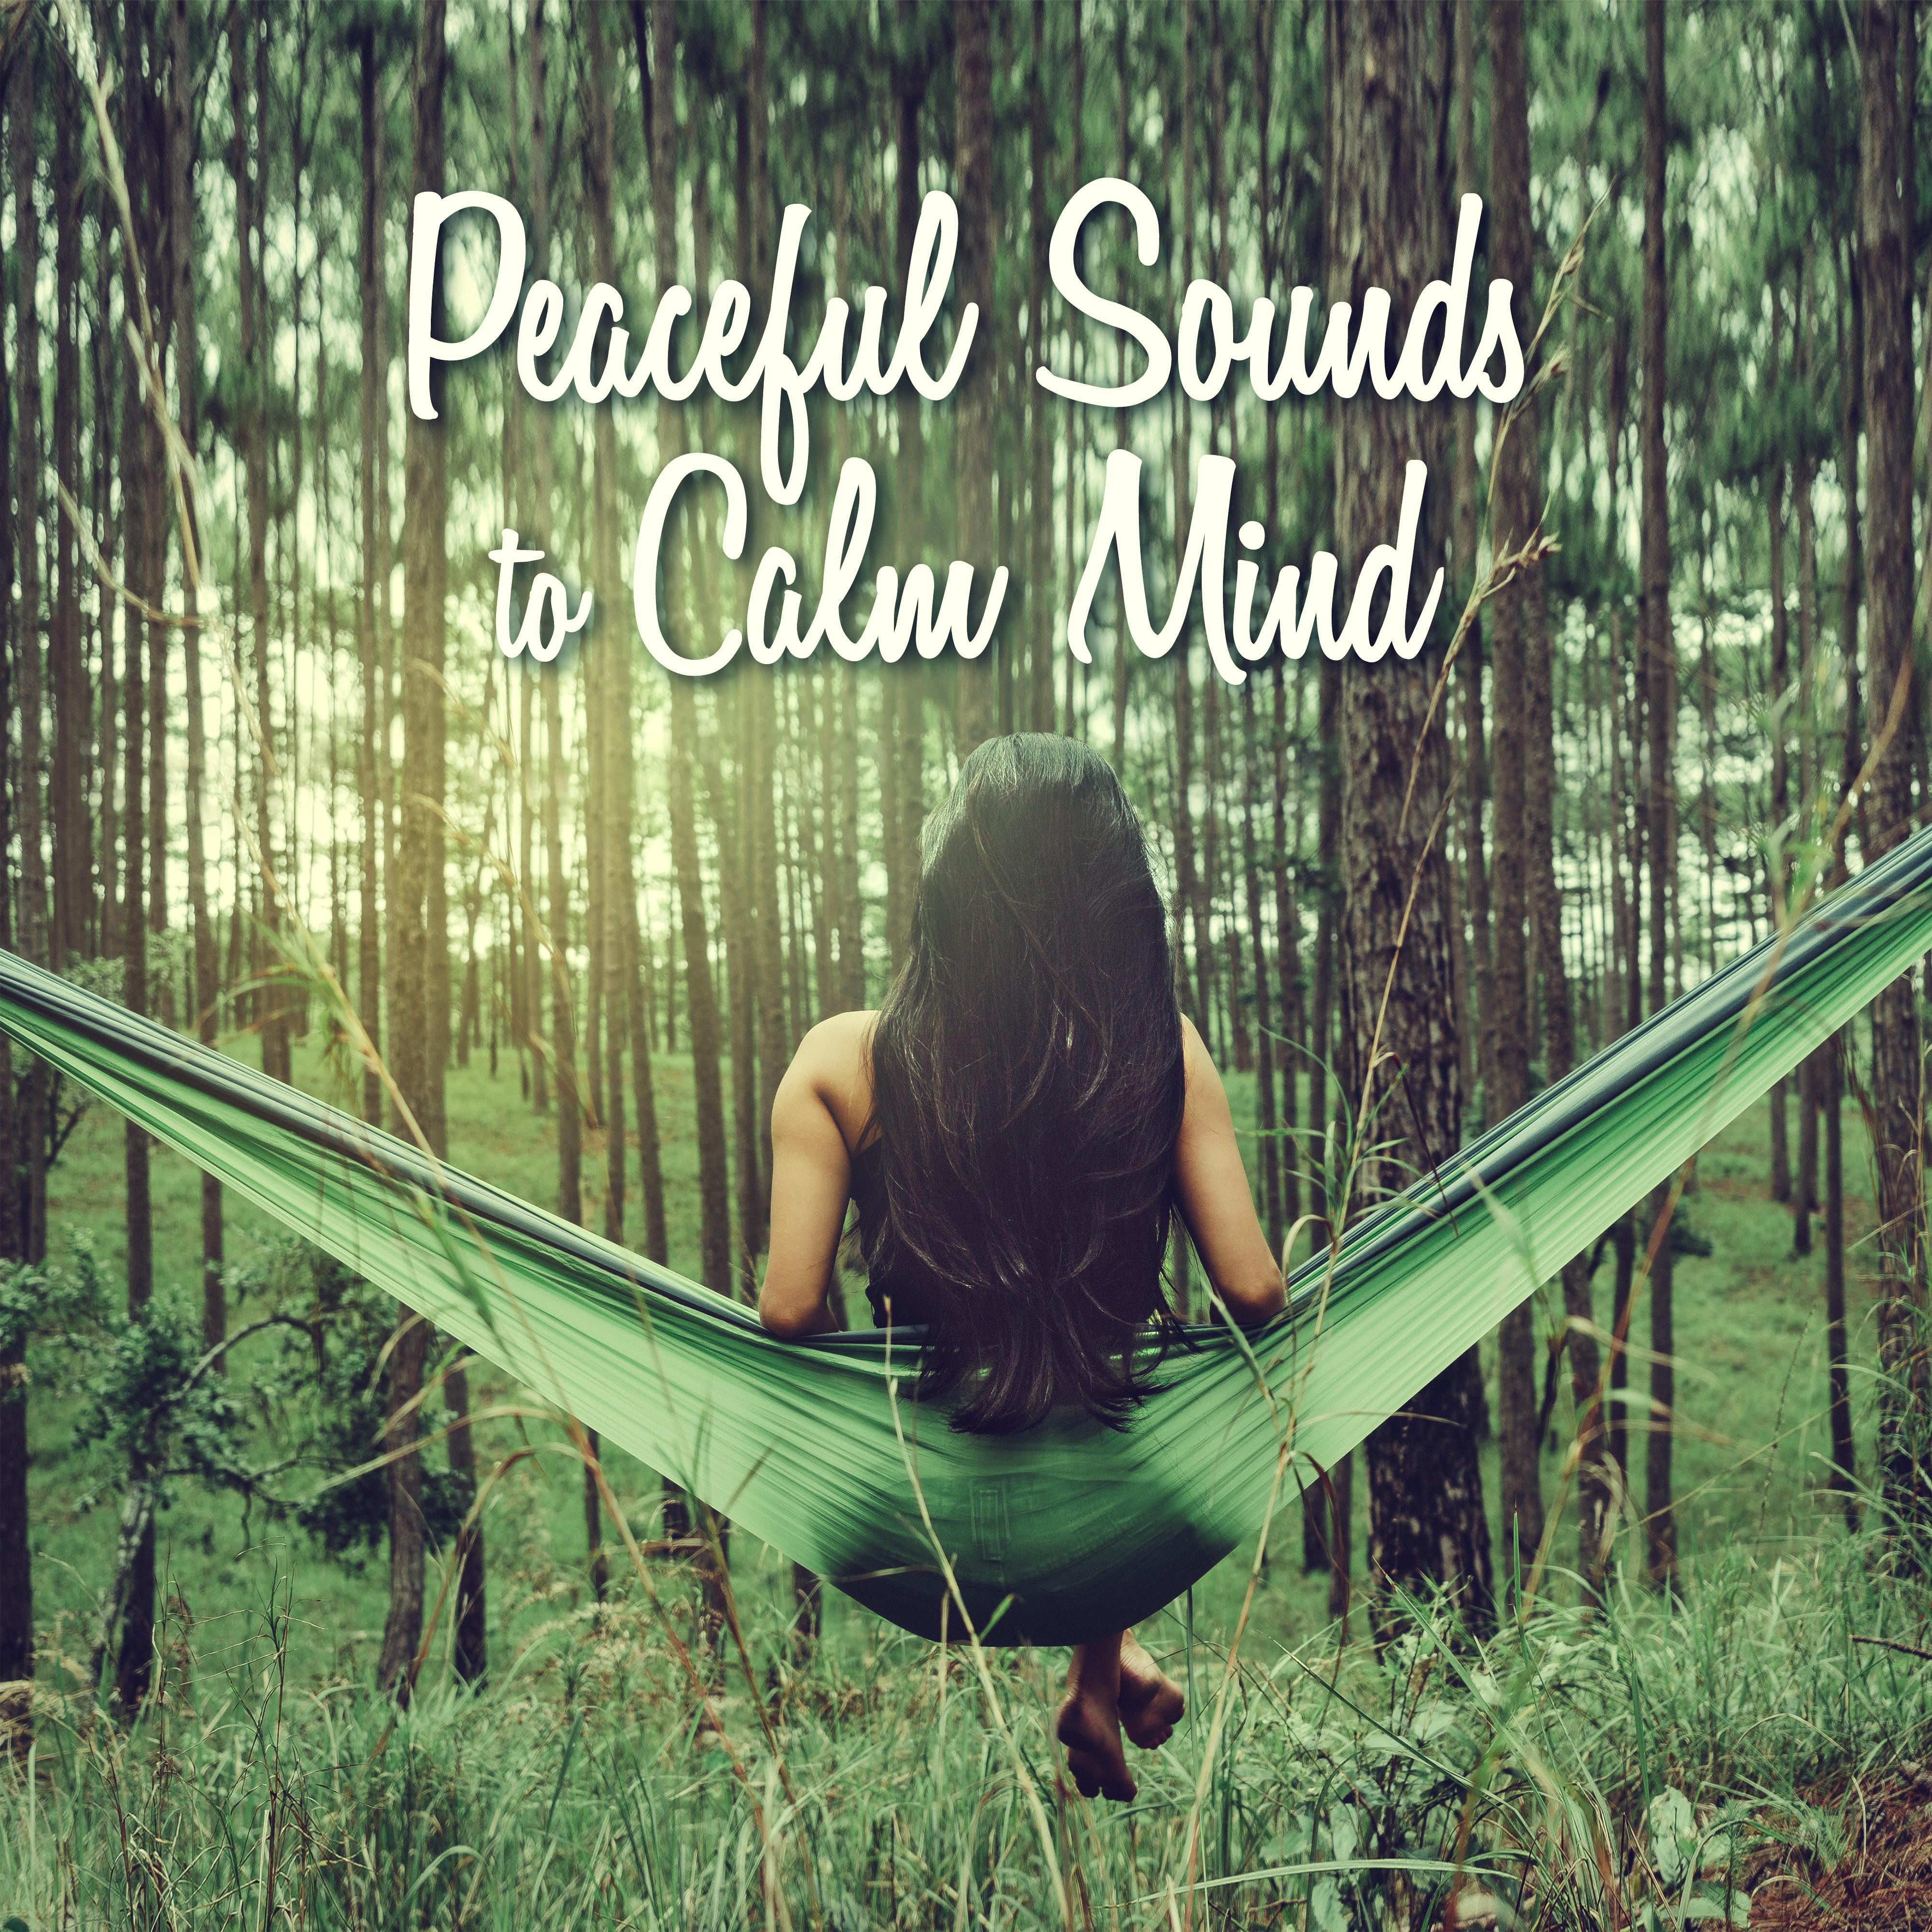 Peaceful Sounds to Calm Mind – Easy Listening New Age Songs, Soothing Melodies for Relaxation, Mind & Body Rest